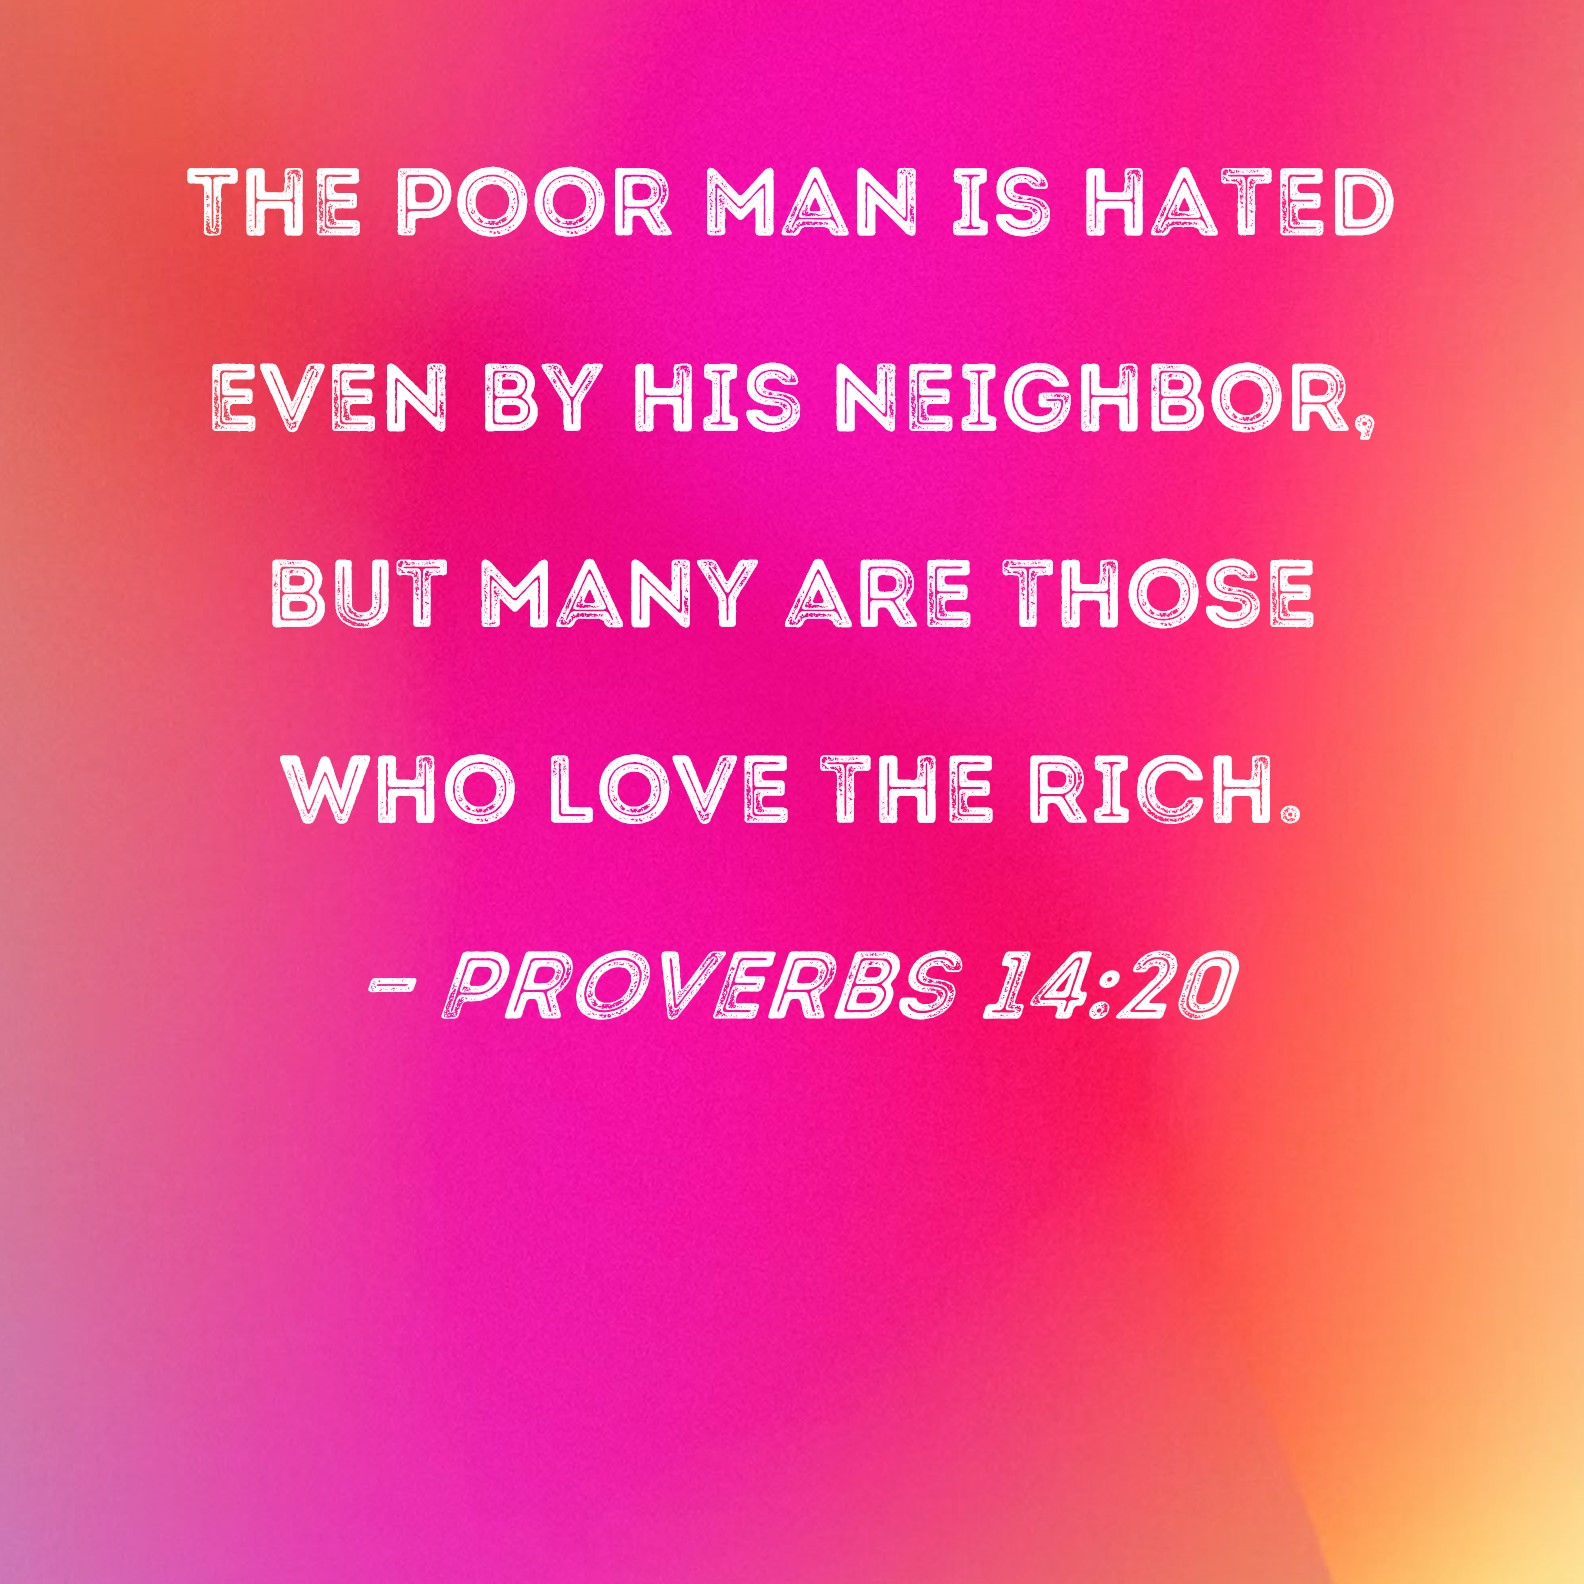 jesus quotes about the poor